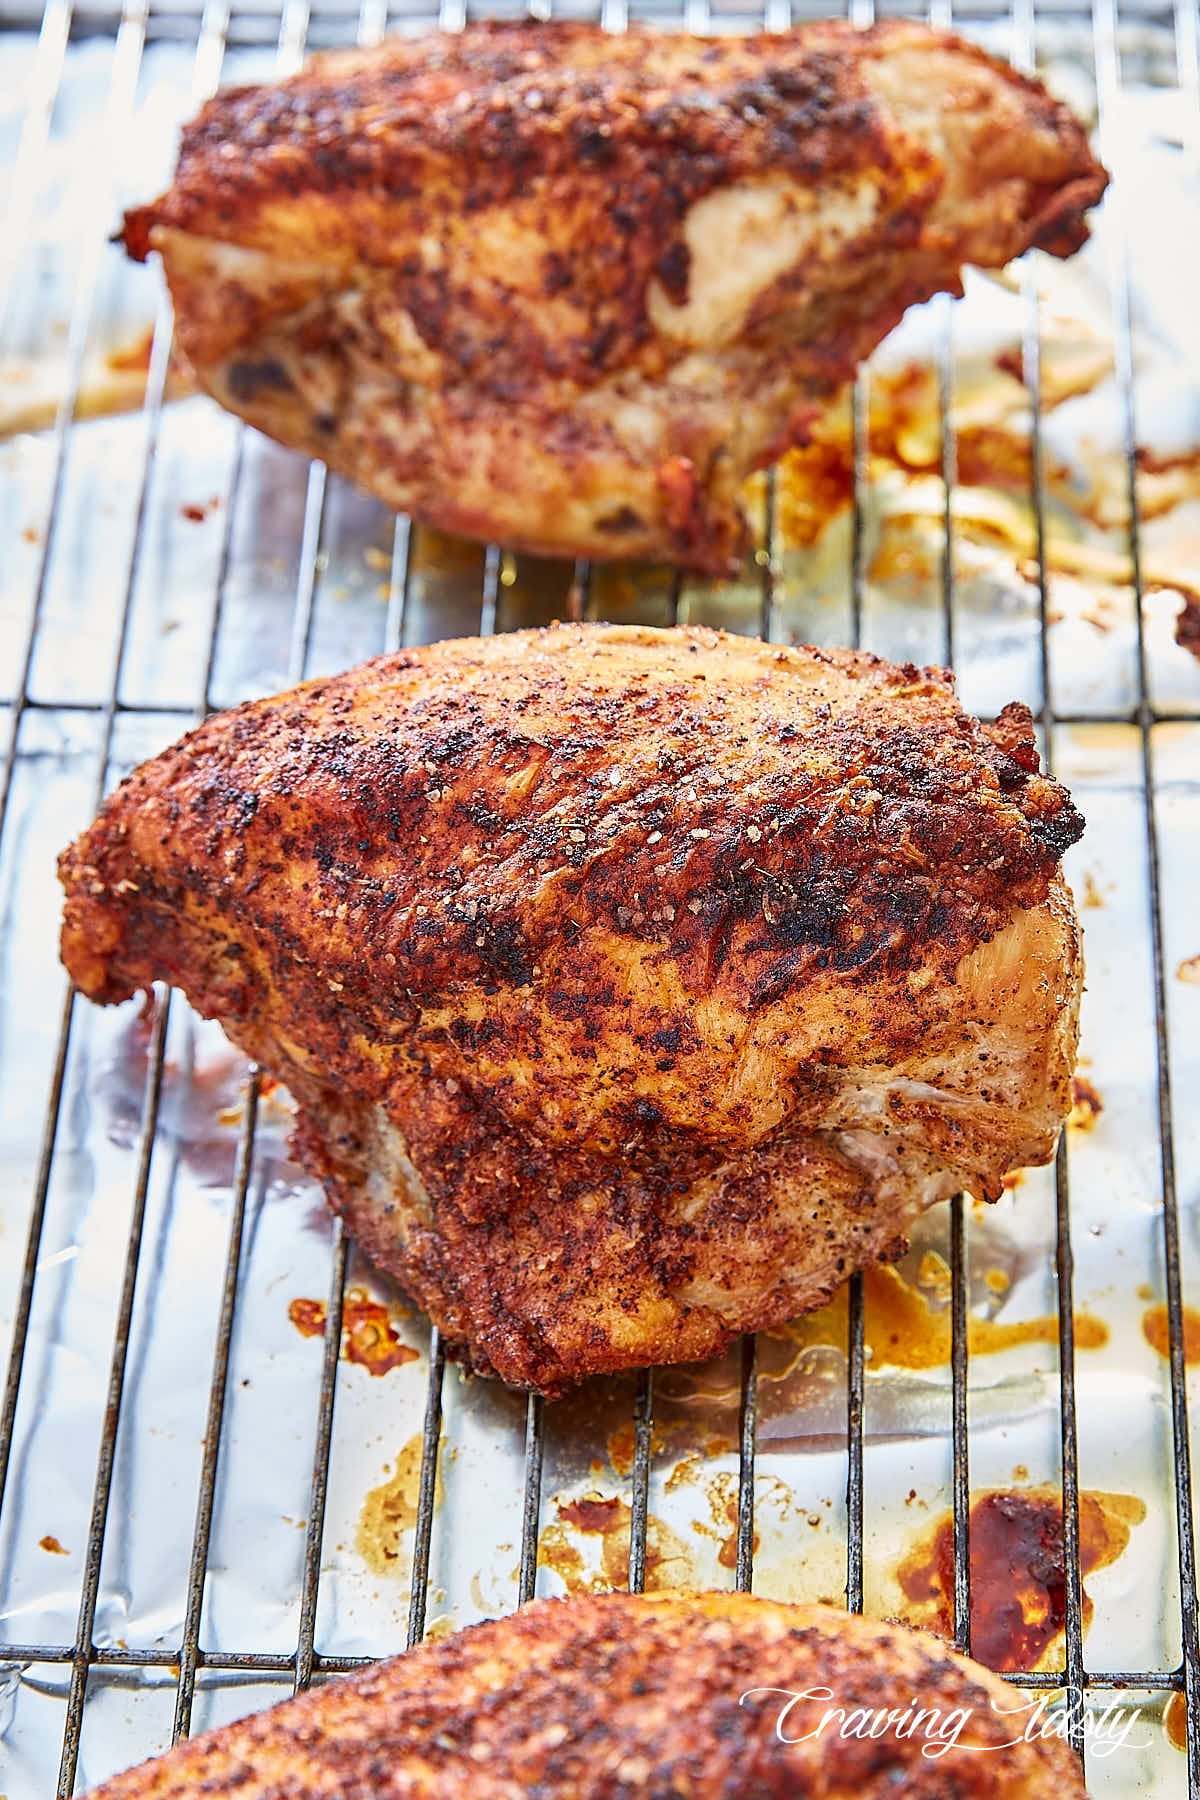 Three beautifully browned crispy baked chicken breasts on a cooling rack.